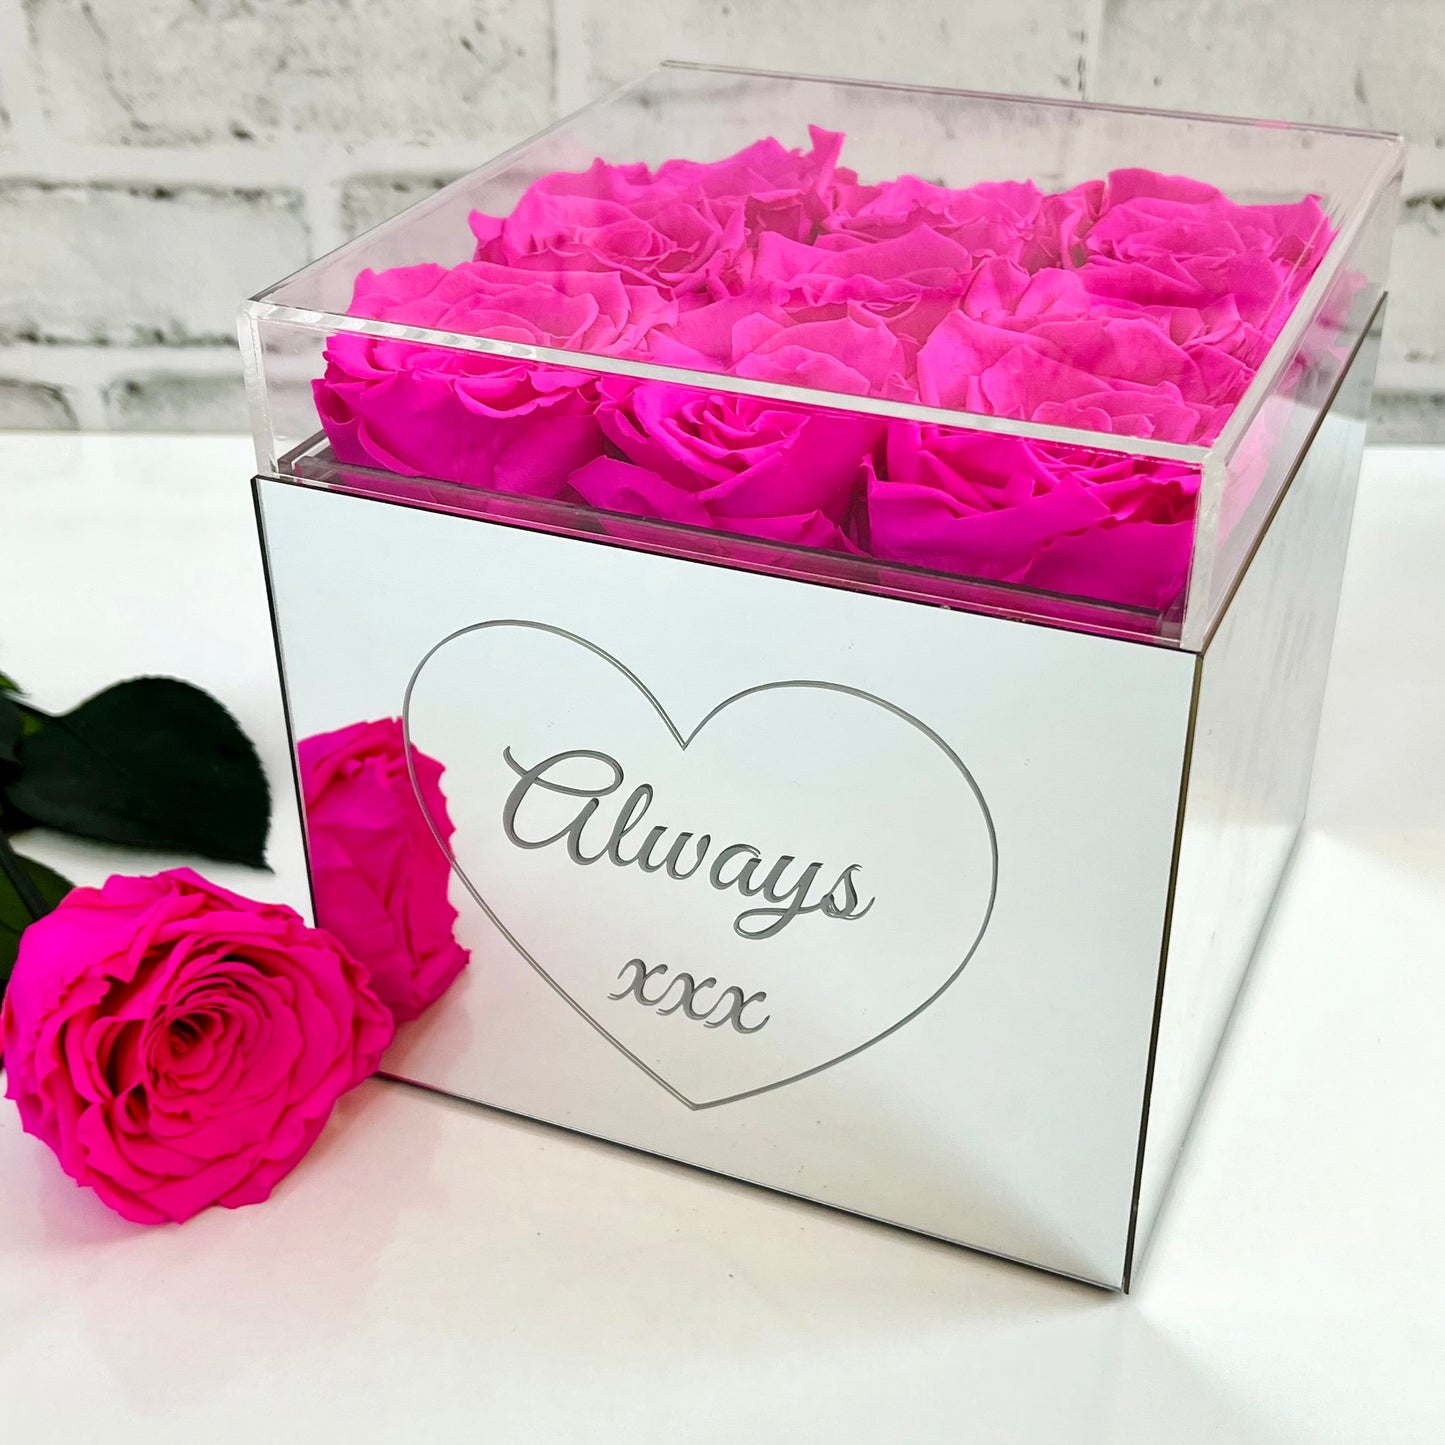 Infinity Rose Mirrored Box - One Year Roses - Personalised Rose Box - Shocking Pink Infinity Roses - Rose Colours divider-Shocking Pink